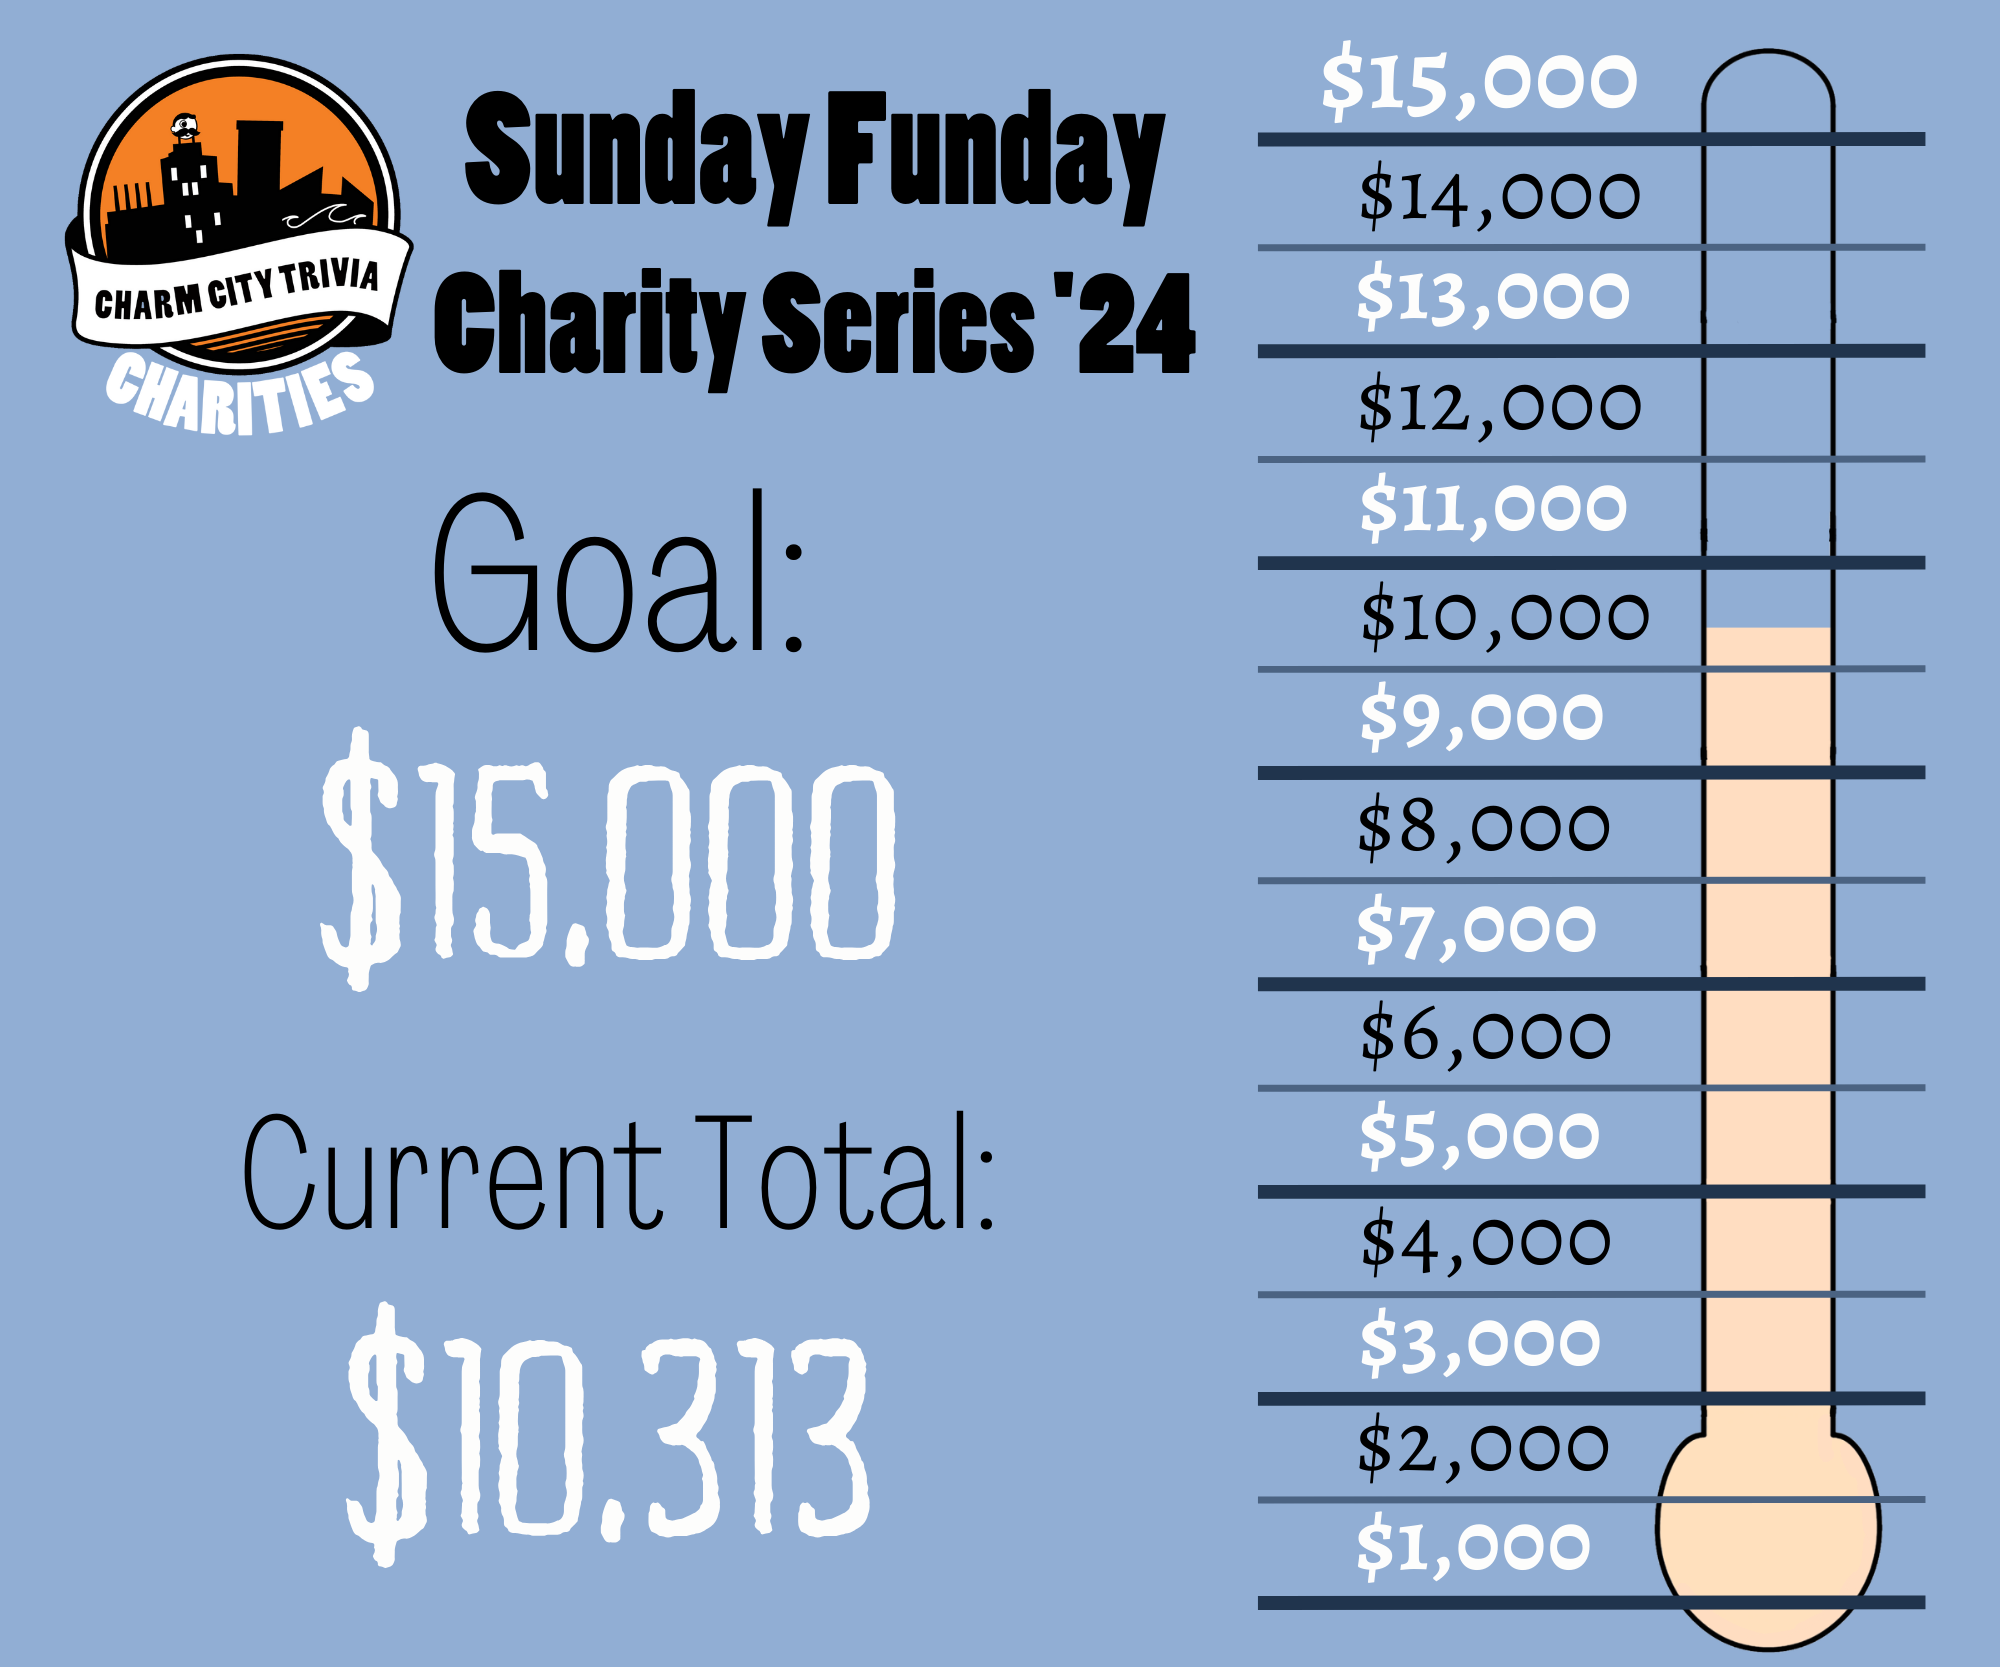 a light blue background with a fundraiser style thermometer, lines separating the thermometer into donation milestones from $1,000 to $15,000, a very light orange bar inside the thermometer that goes to about a third of the way between $10,000 and $11,000, the Charm City Trivia Charities logo, and black and white text. The text reads: Sunday Funday Charity Series '24. Goal: $15,000. Current Total: $10,313.